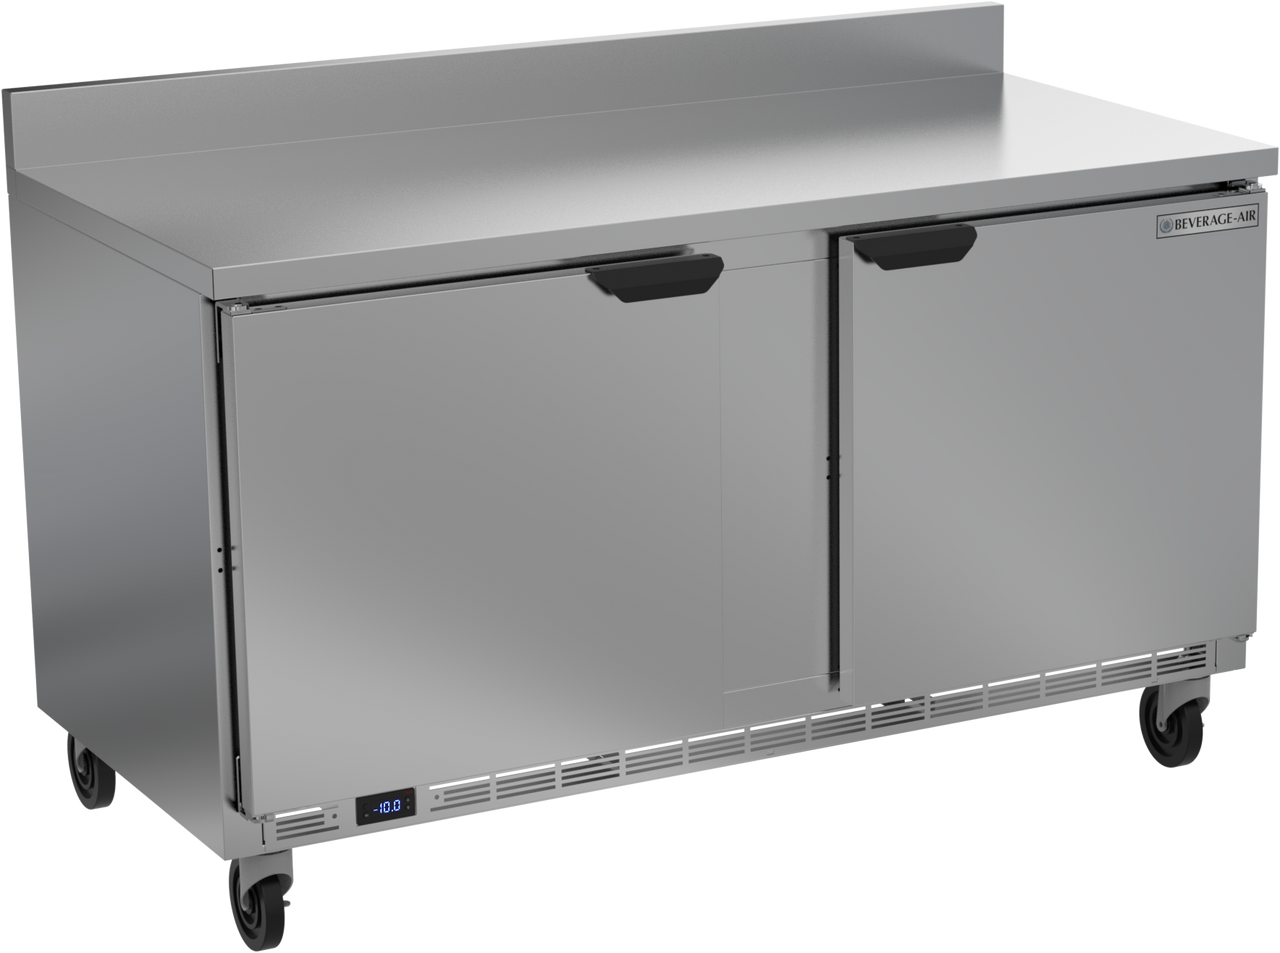 Beverage-Air WTF60AHC-FIP 60" Two Section Worktop Undercounter Freezer with Foamed-In Backsplash